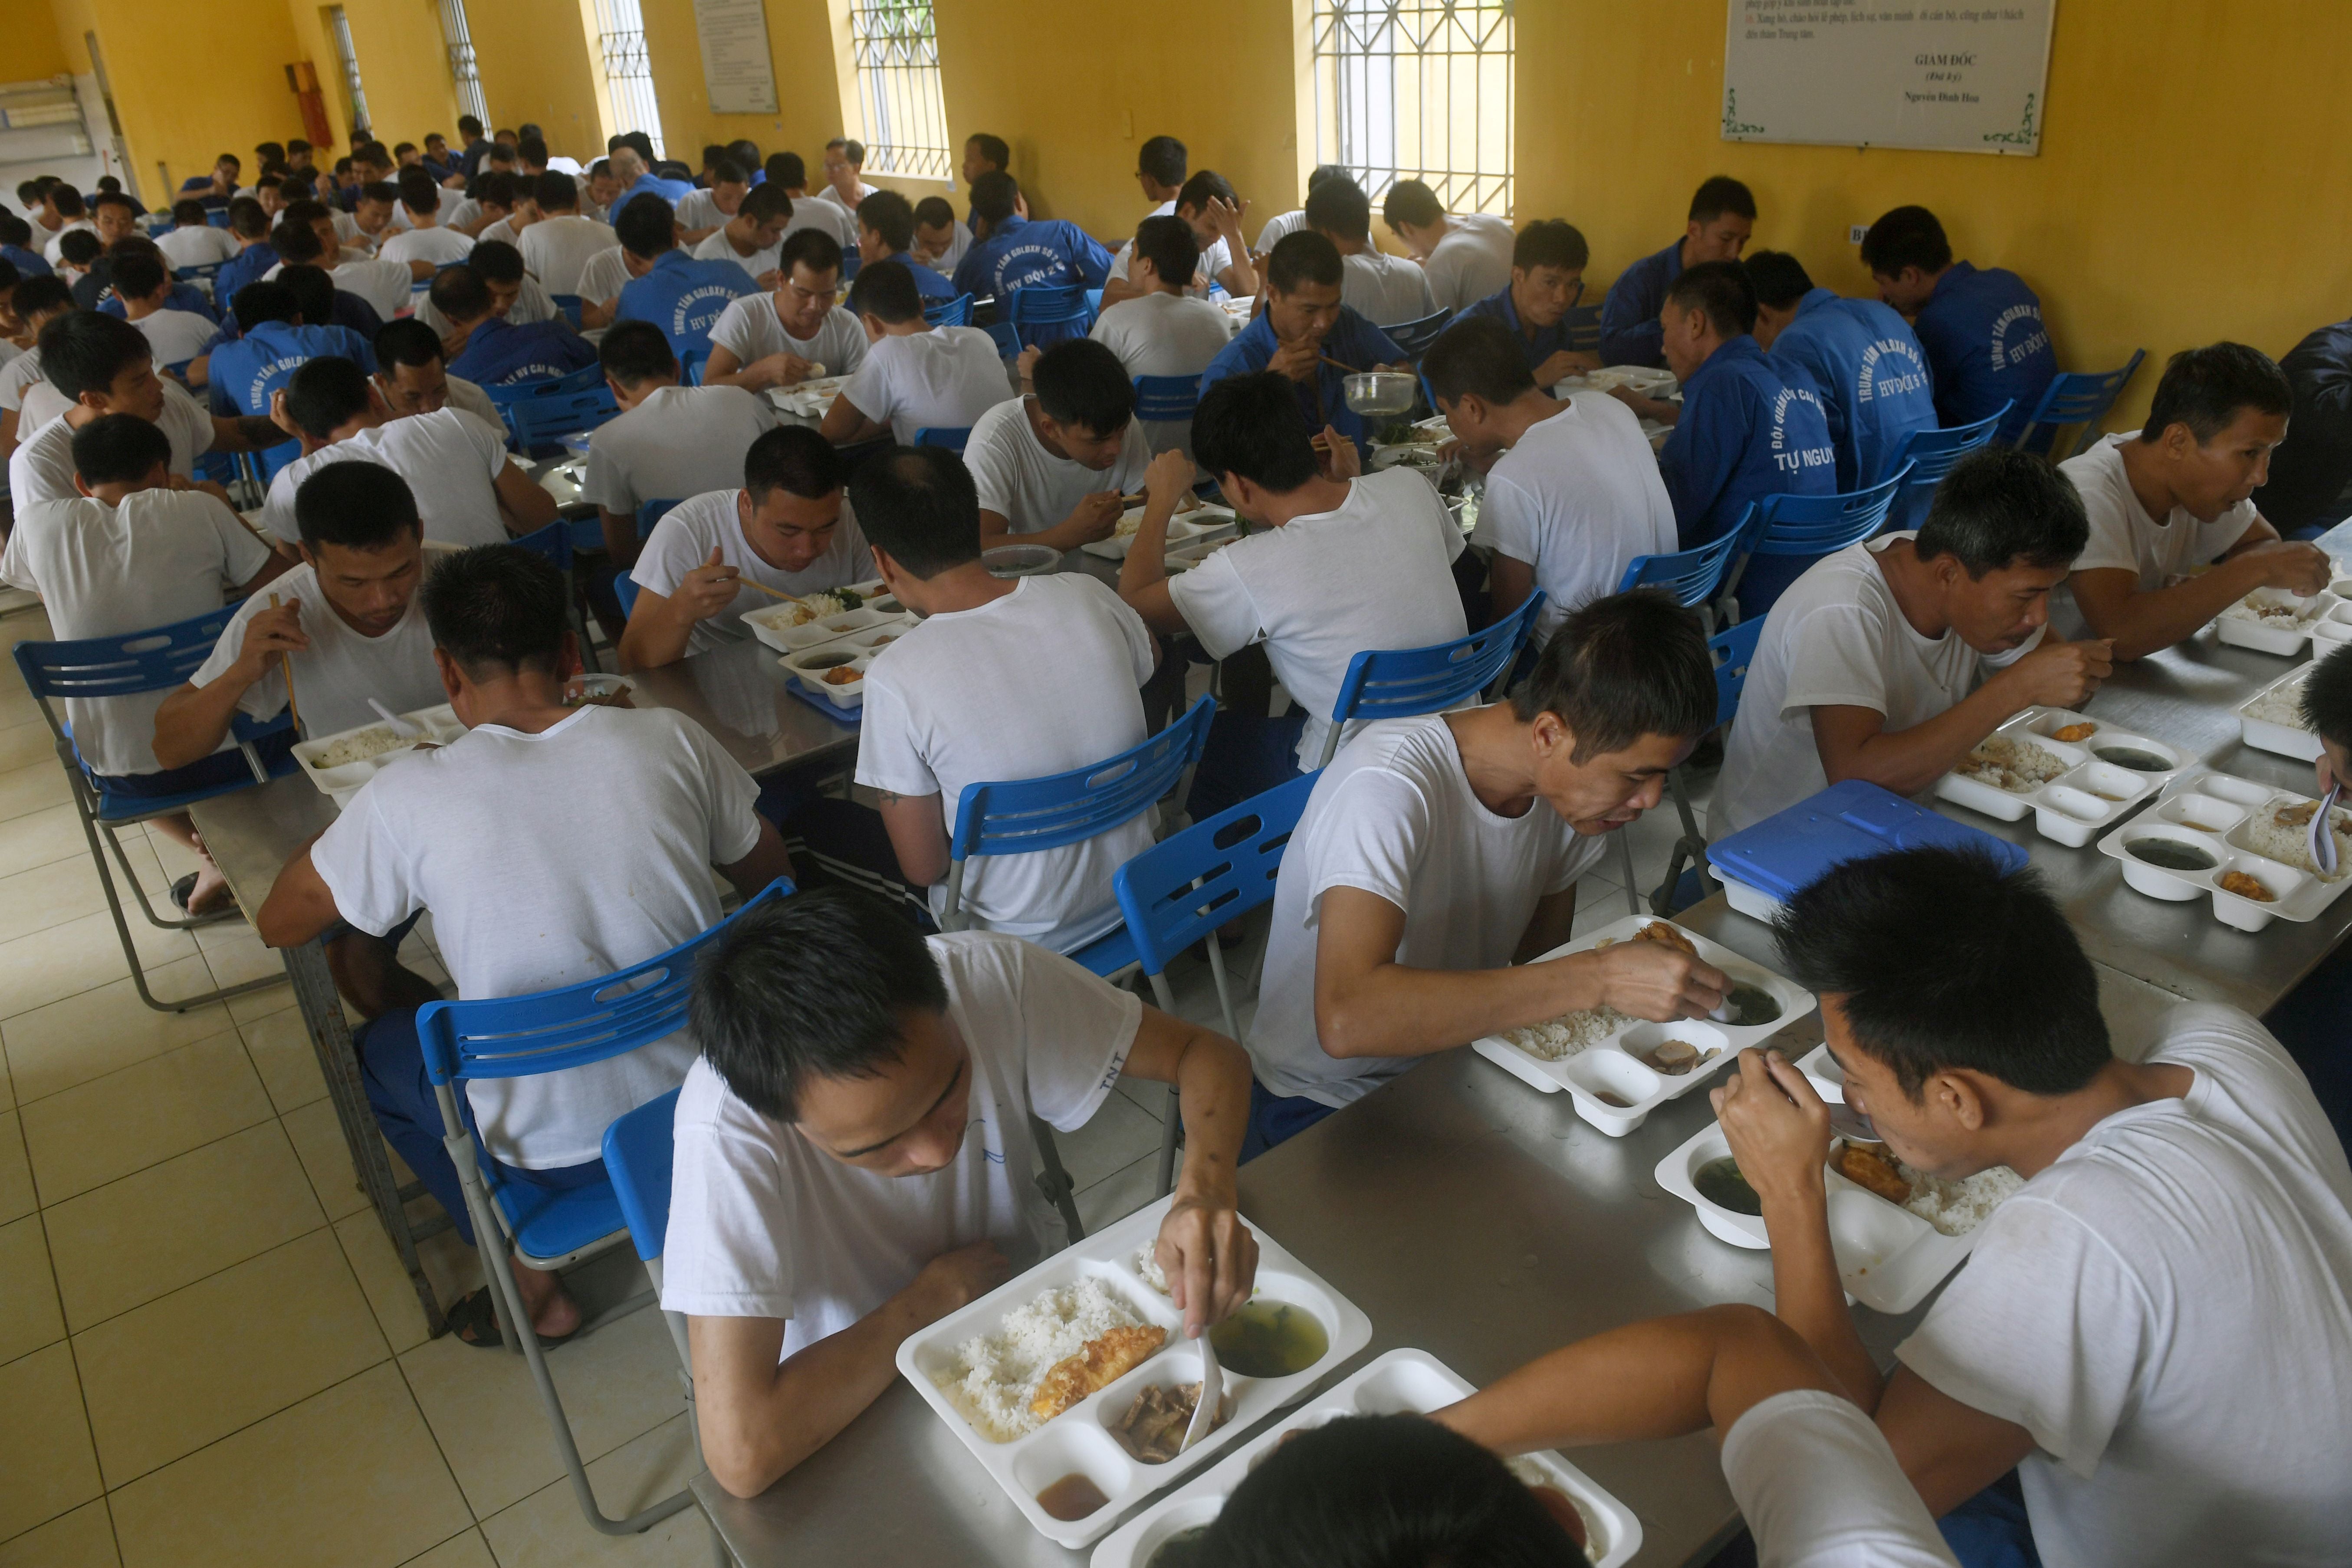 Inmates eating lunch in the dining hall of a drug rehabilitation centre in the northern city of Hai Phong in a picture taken on 16 November 2017